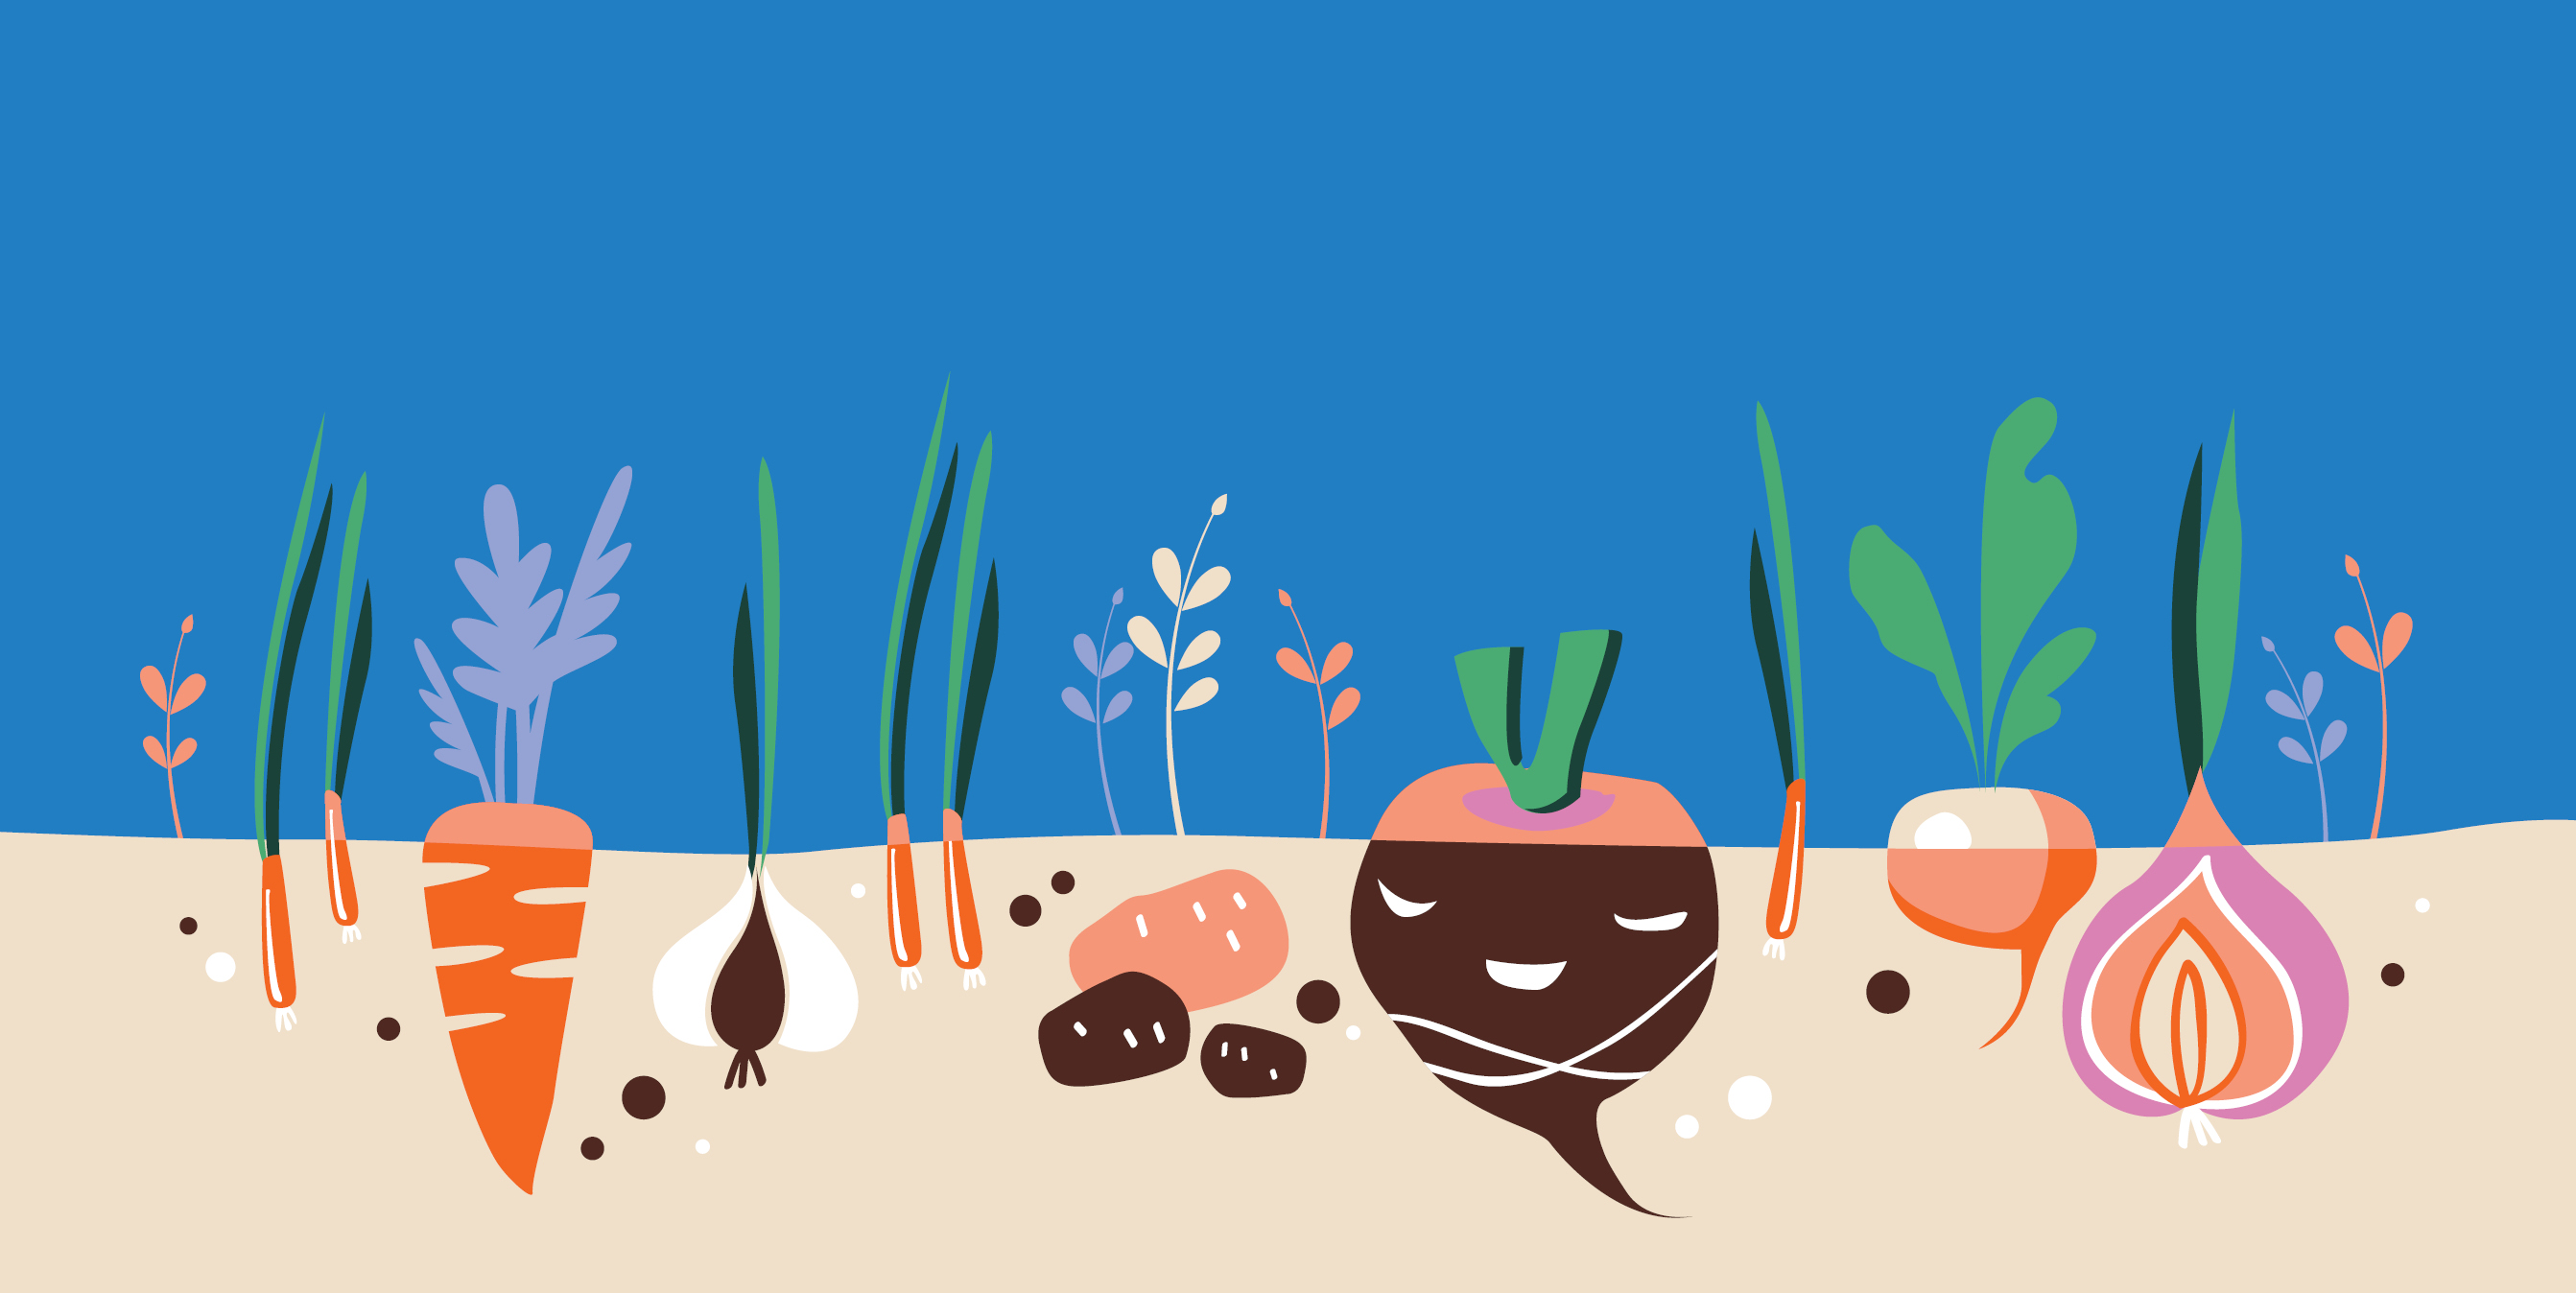 An iconography image of vegetables such as carrots and turnips growing in the ground.